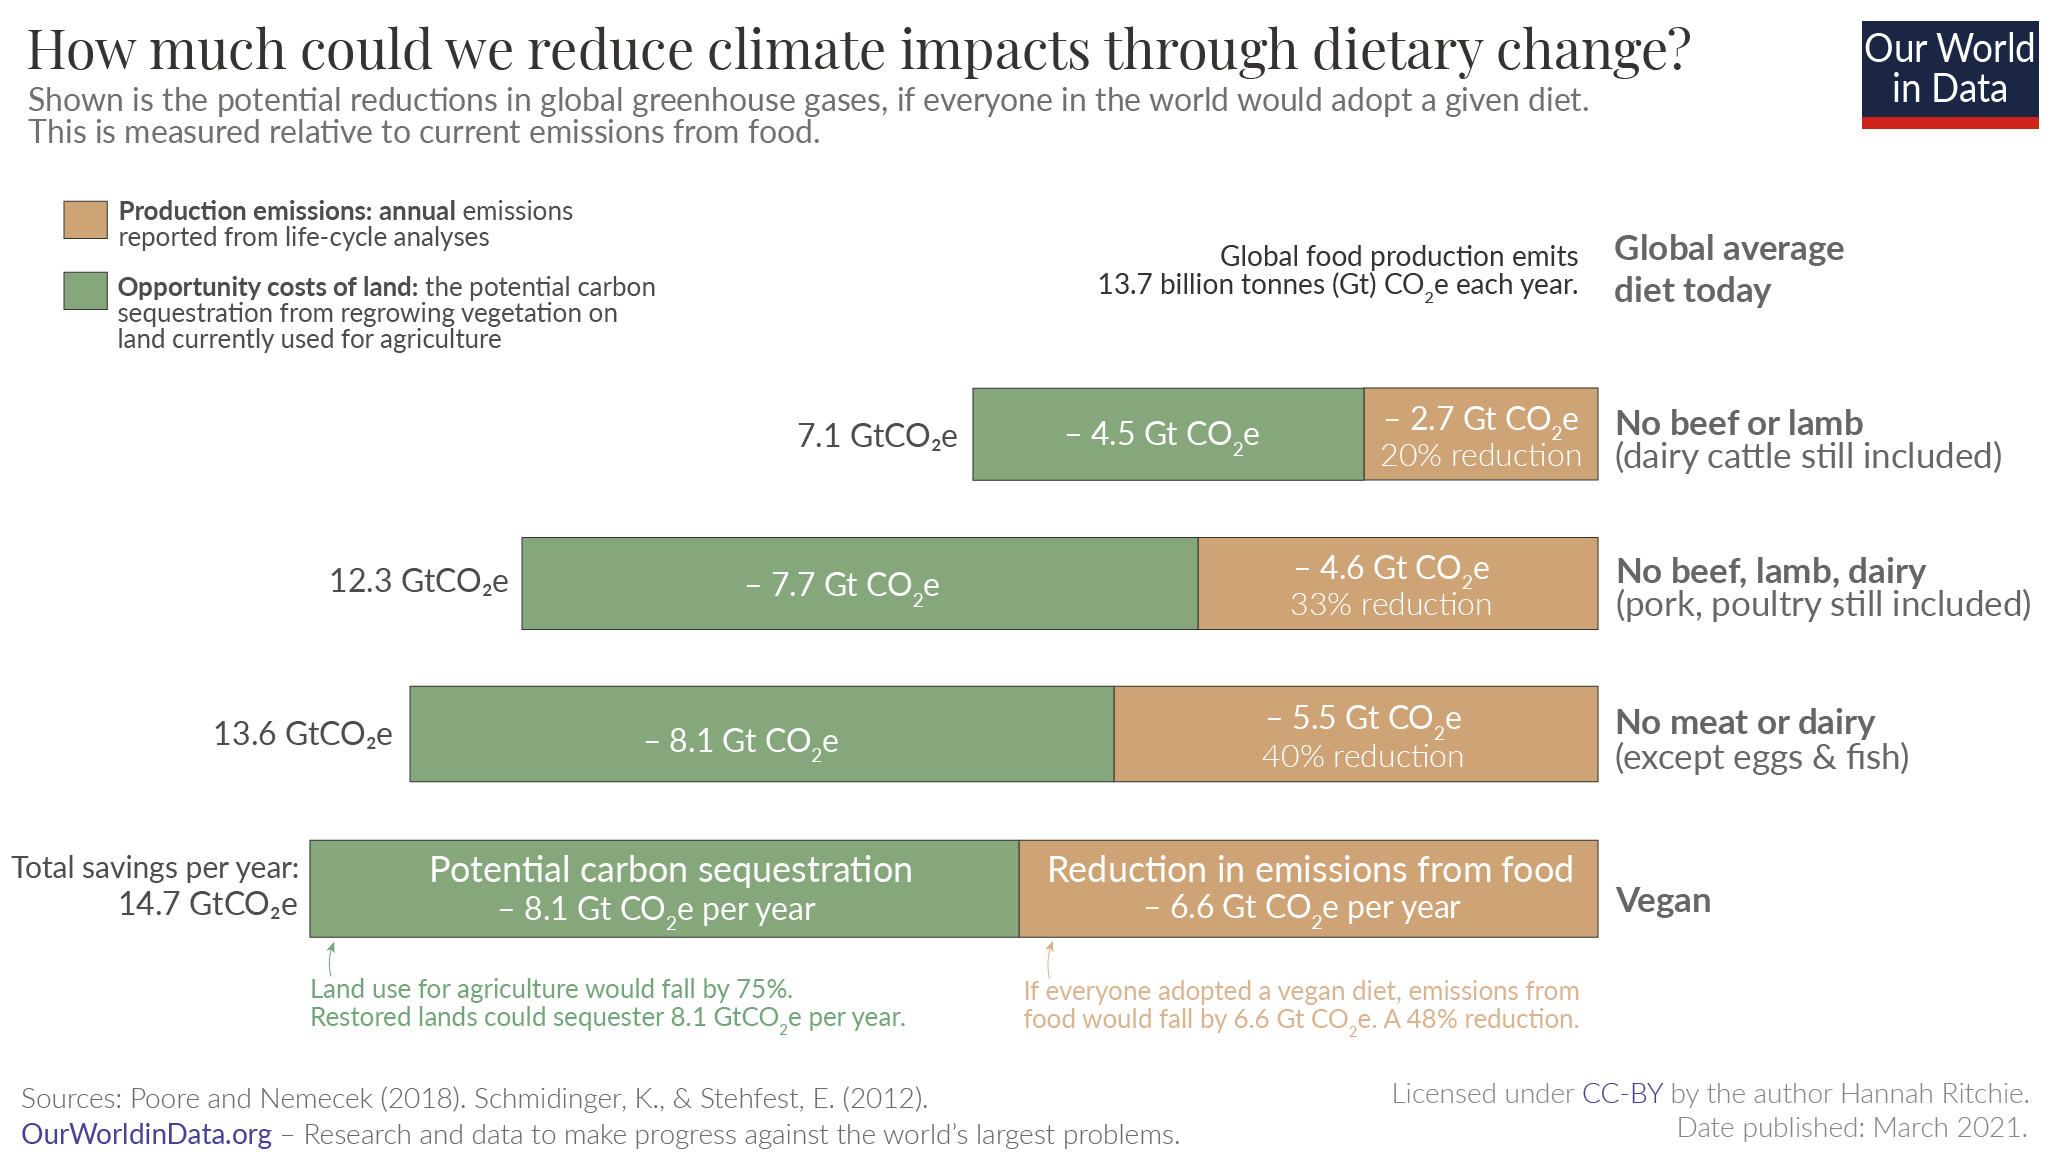 Bar chart showing the possible reduction in dietary emissions for different diets, split into direct production emissions and opportunity costs of land use.